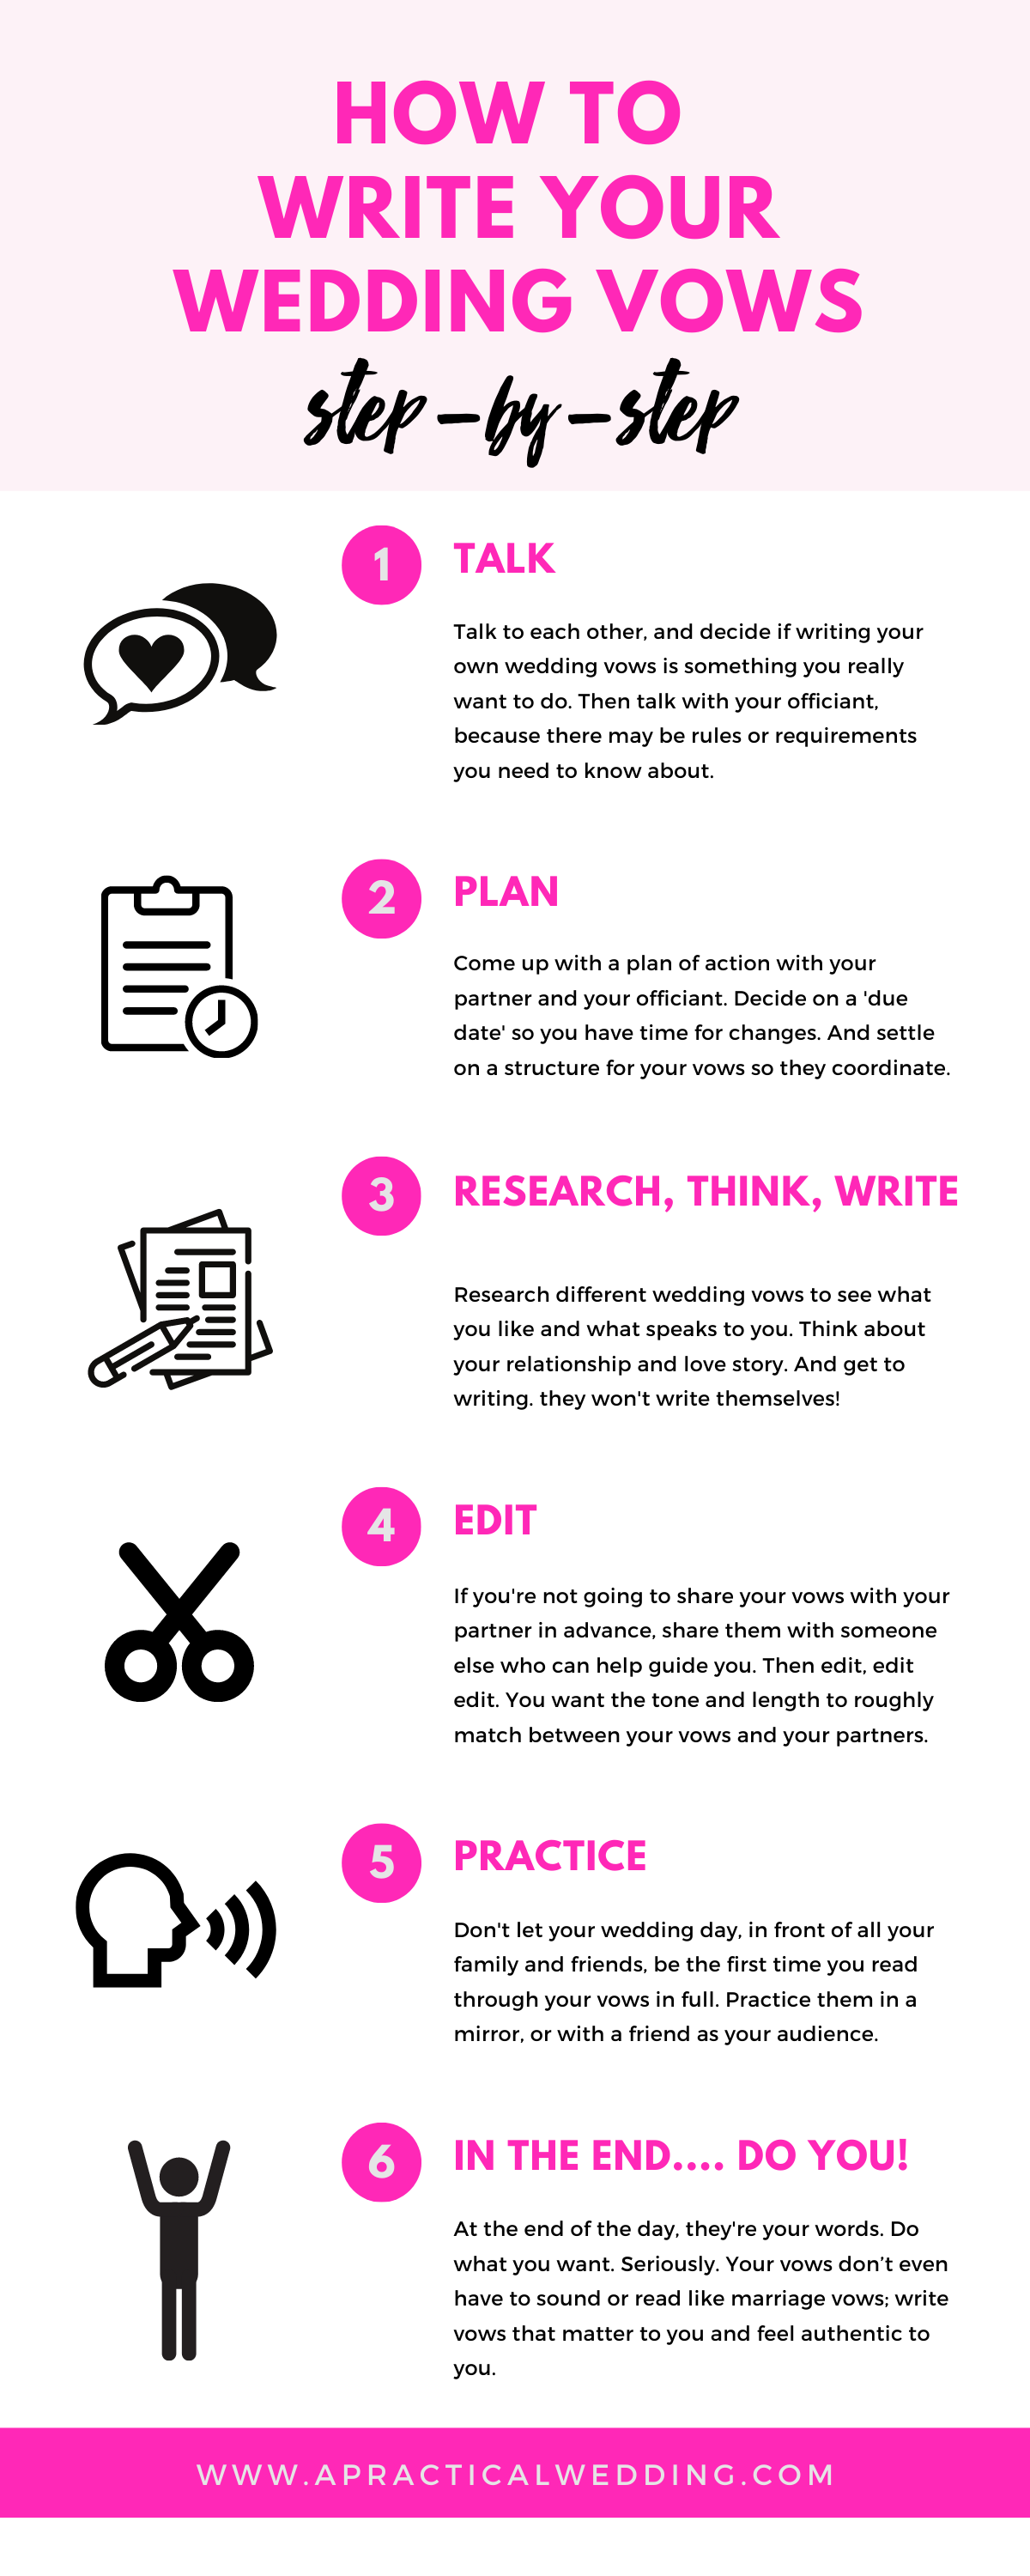 Infographic with 5 steps for "How To Write Your Wedding Vows"